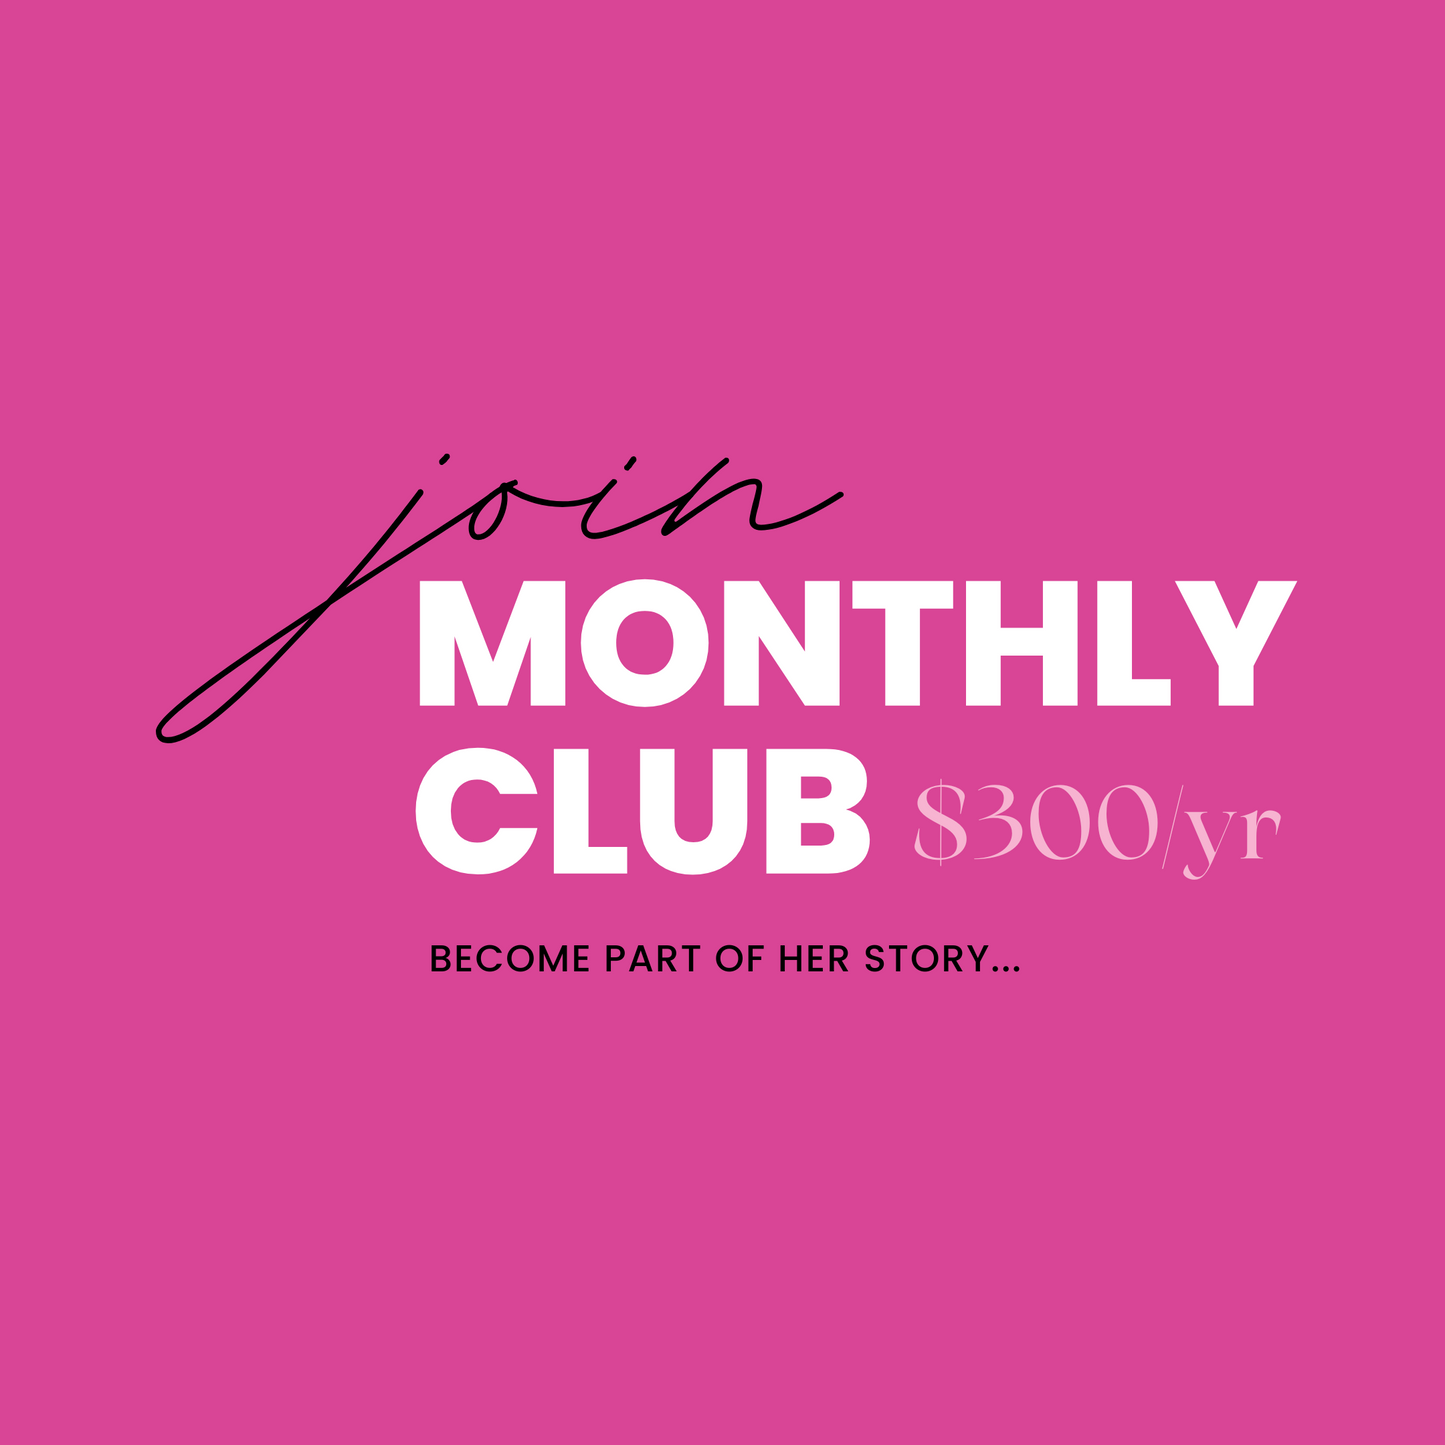 Monthly Club - Annual Subscription